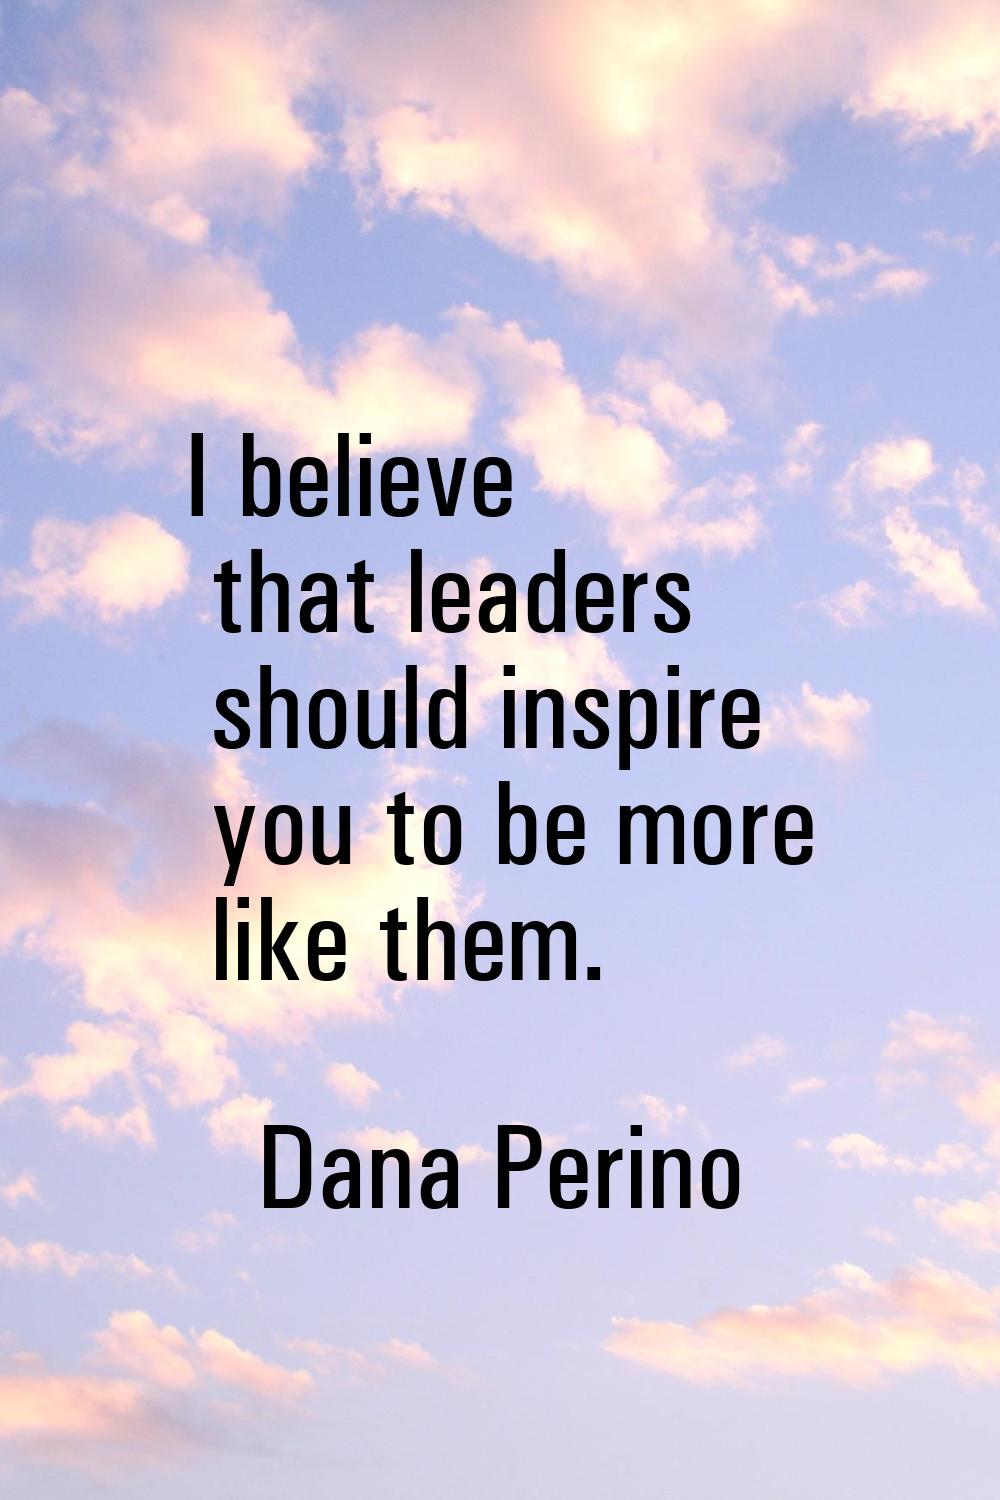 I believe that leaders should inspire you to be more like them.